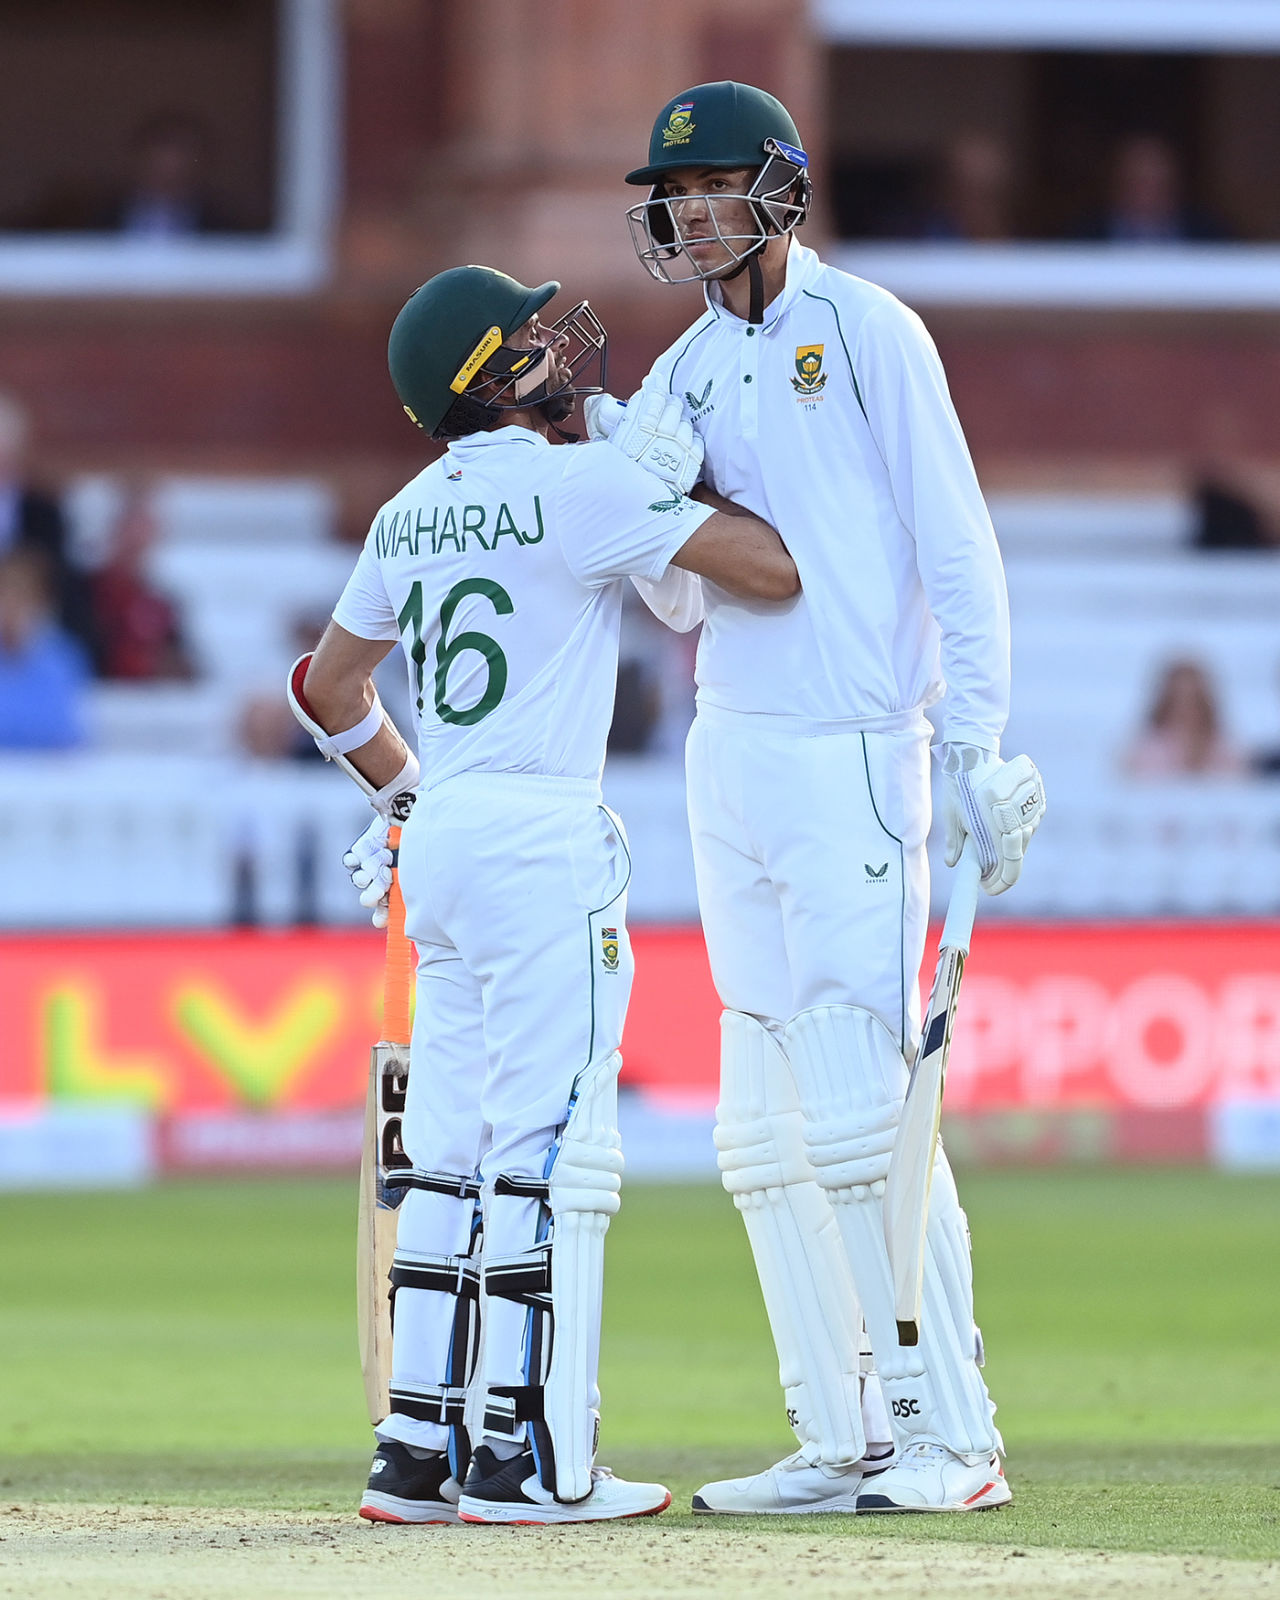 Keshav Maharaj and Marco Jansen shared an 72-run stand for the seventh wicket, England vs South Africa, 1st LV= Insurance Test, Lord's, day 2, August 18, 2022